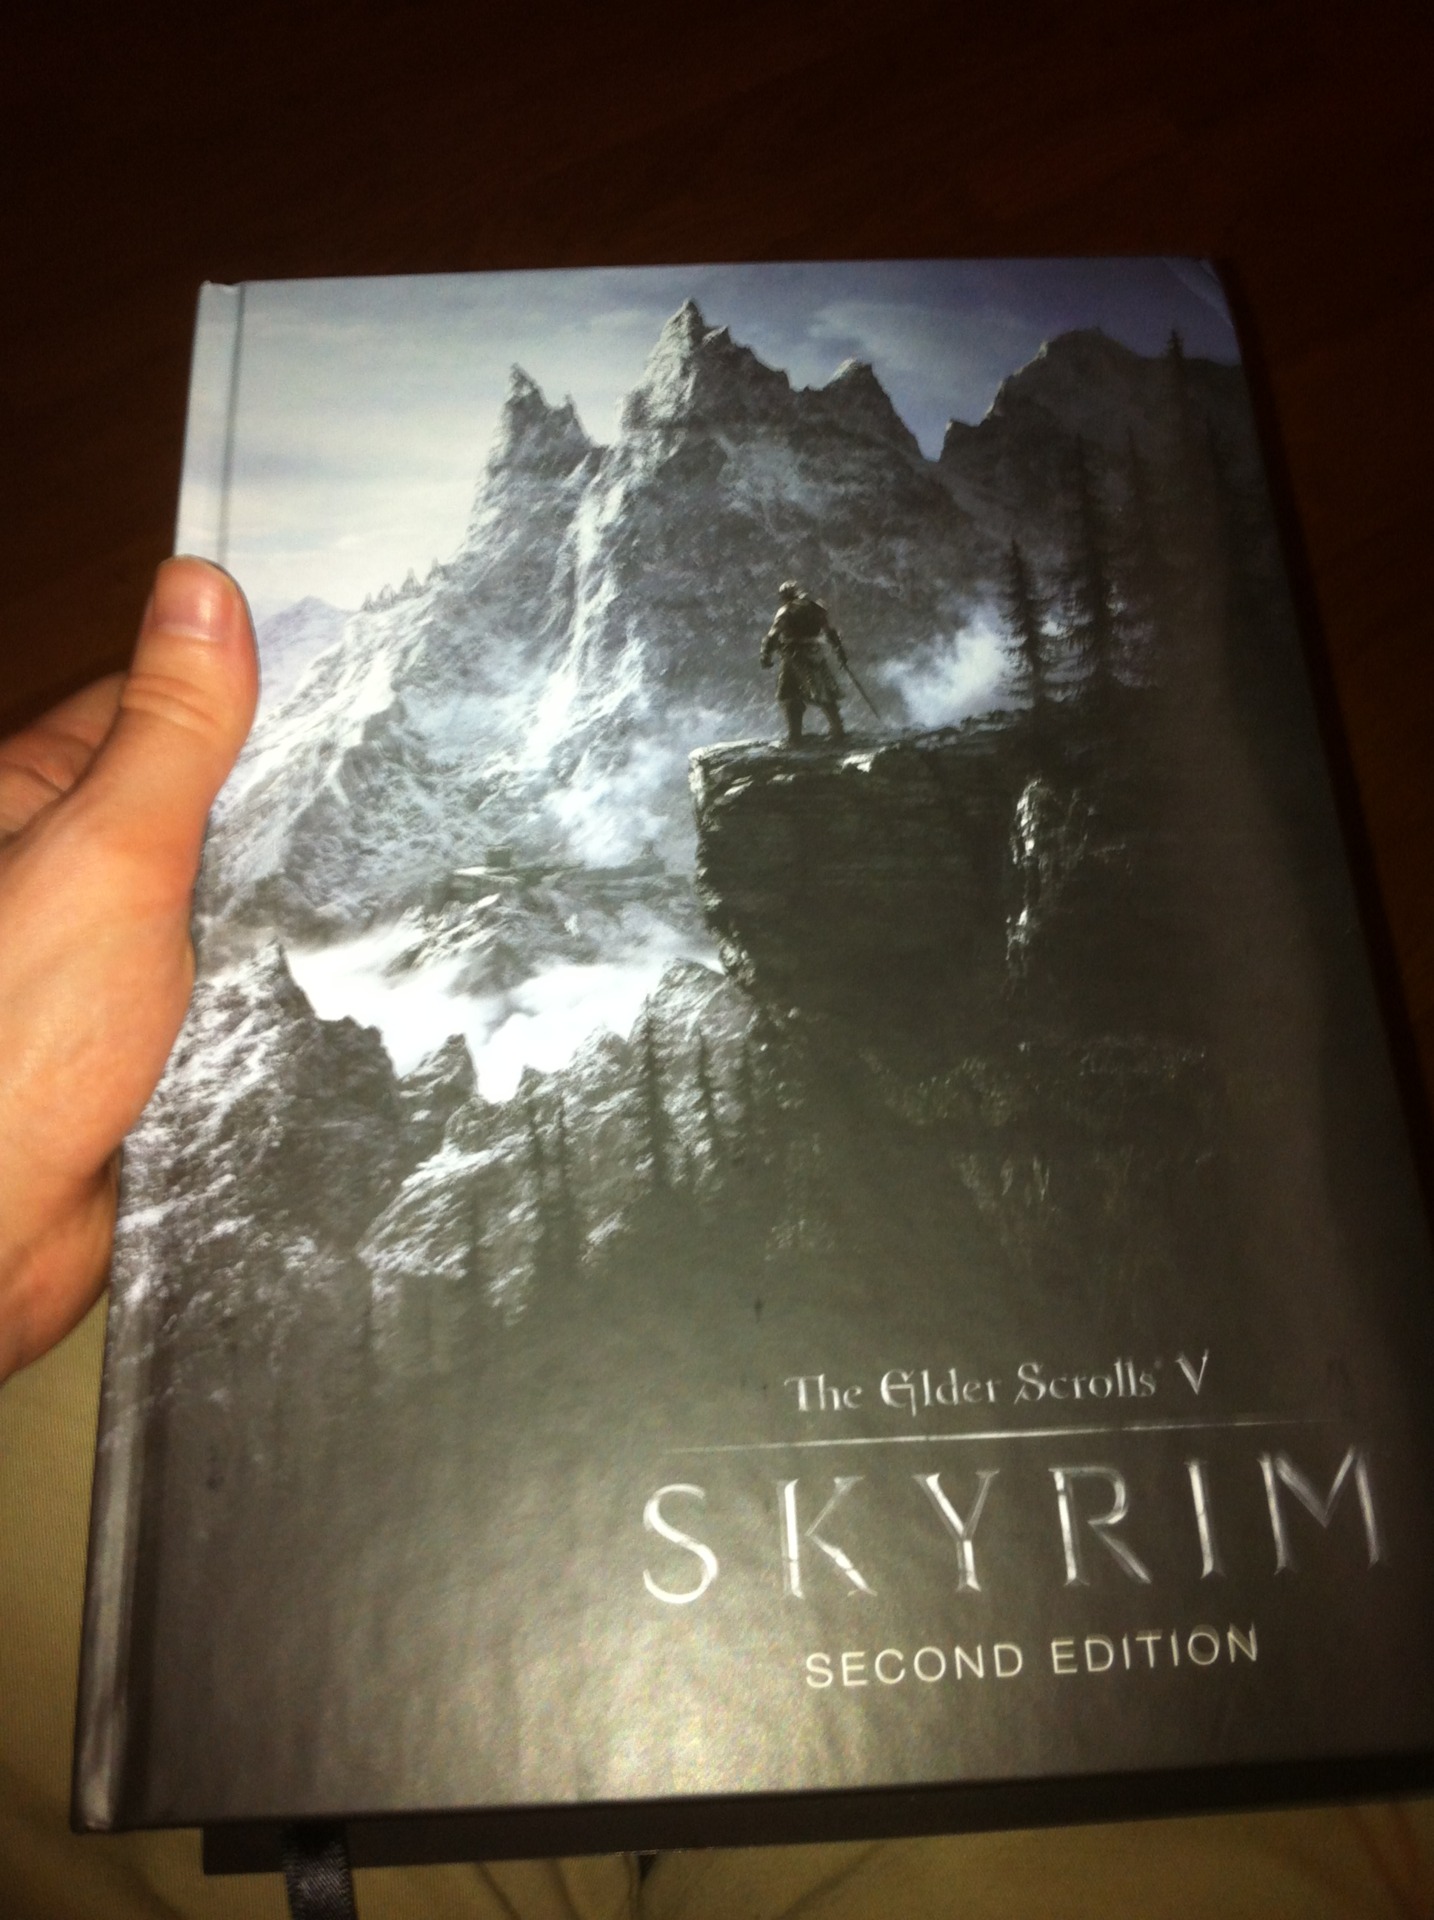  ITS OVER 600 PAGES I CAN KNOCK SOMEONE OUT WITH IT! WHAT THE HELL BETHESDA!  